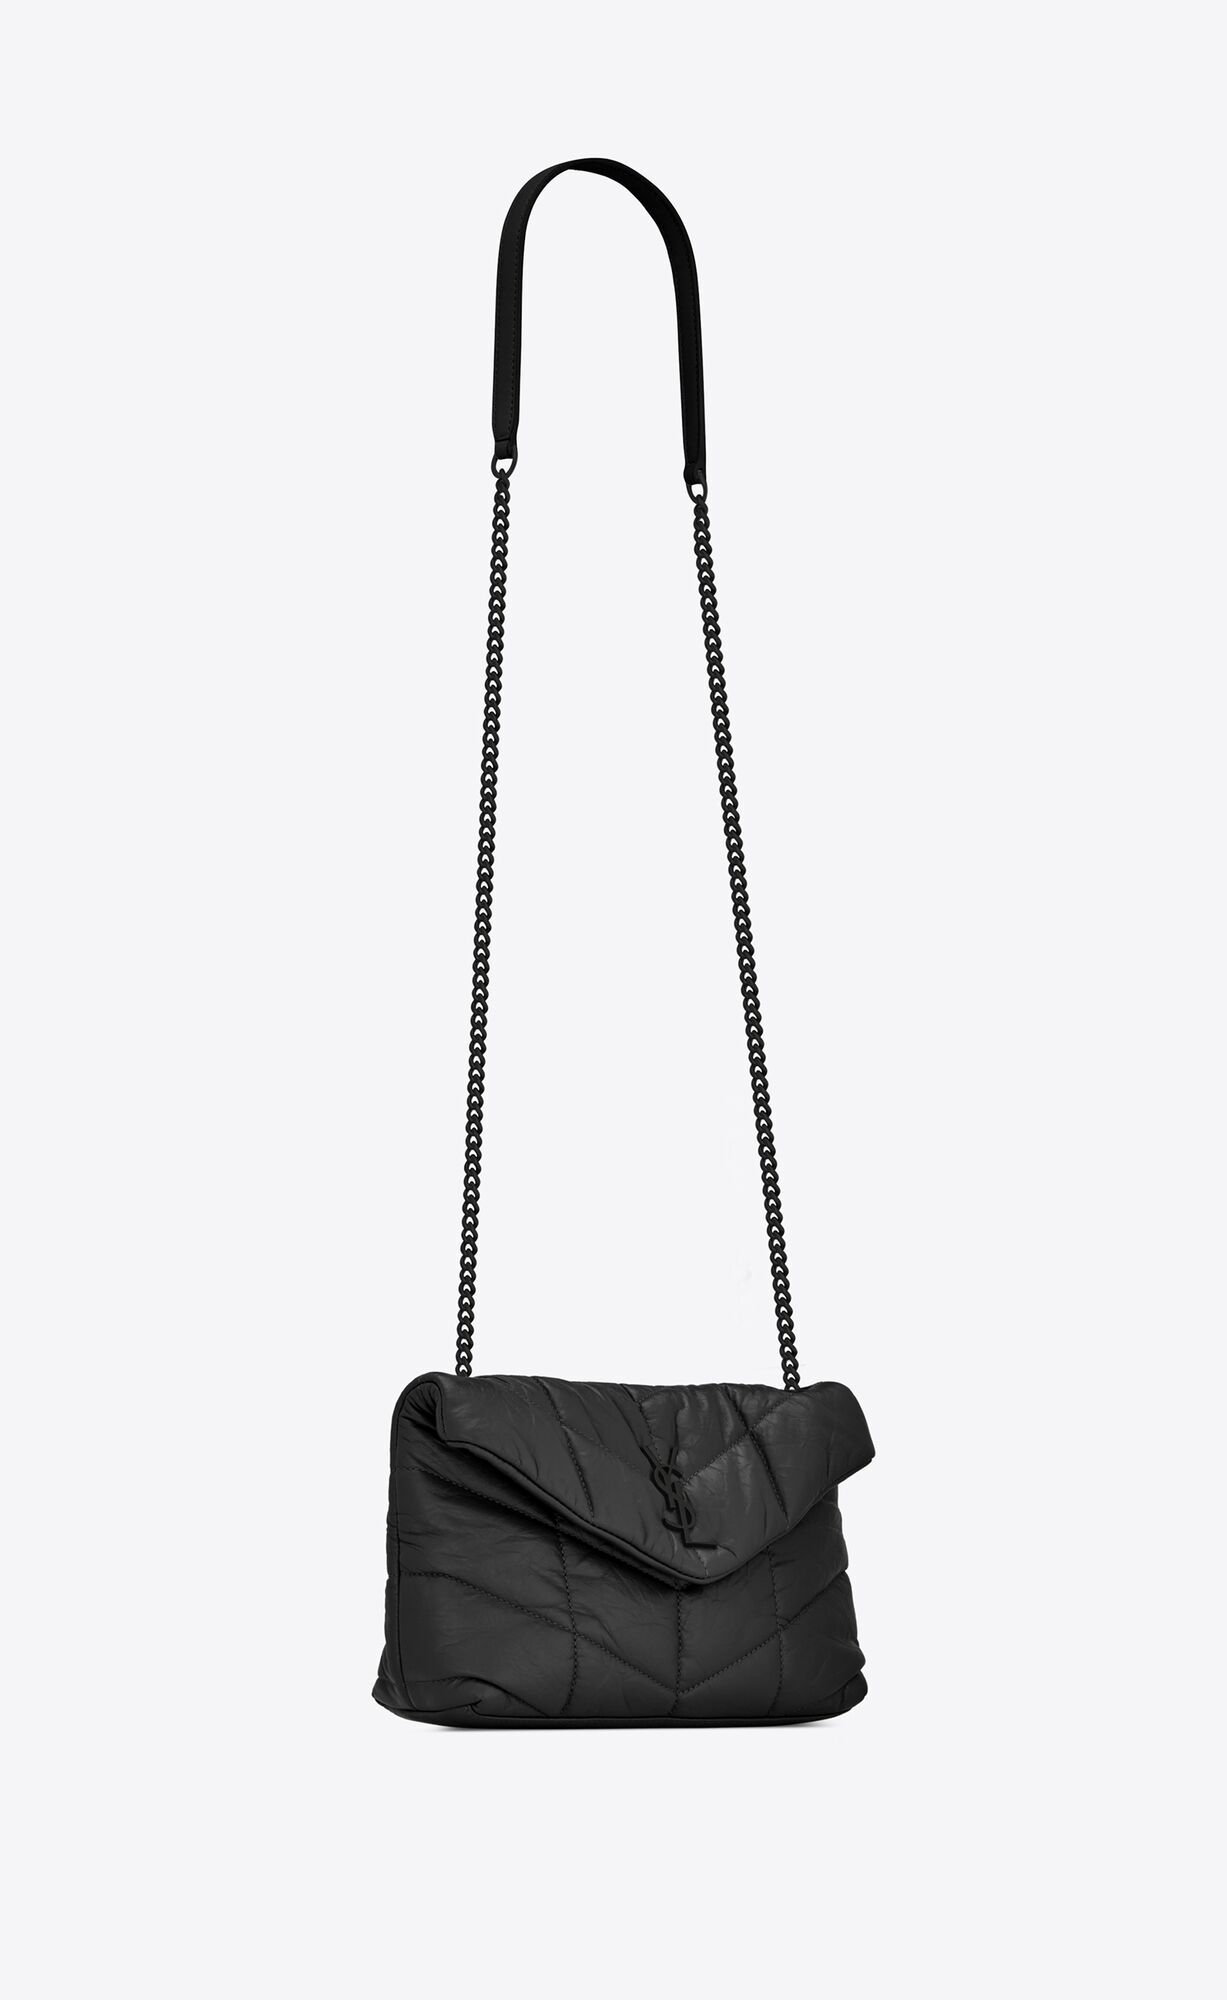 PUFFER toy bag in quilted wrinkled matte leather | Saint Laurent | YSL.com | Saint Laurent Inc. (Global)